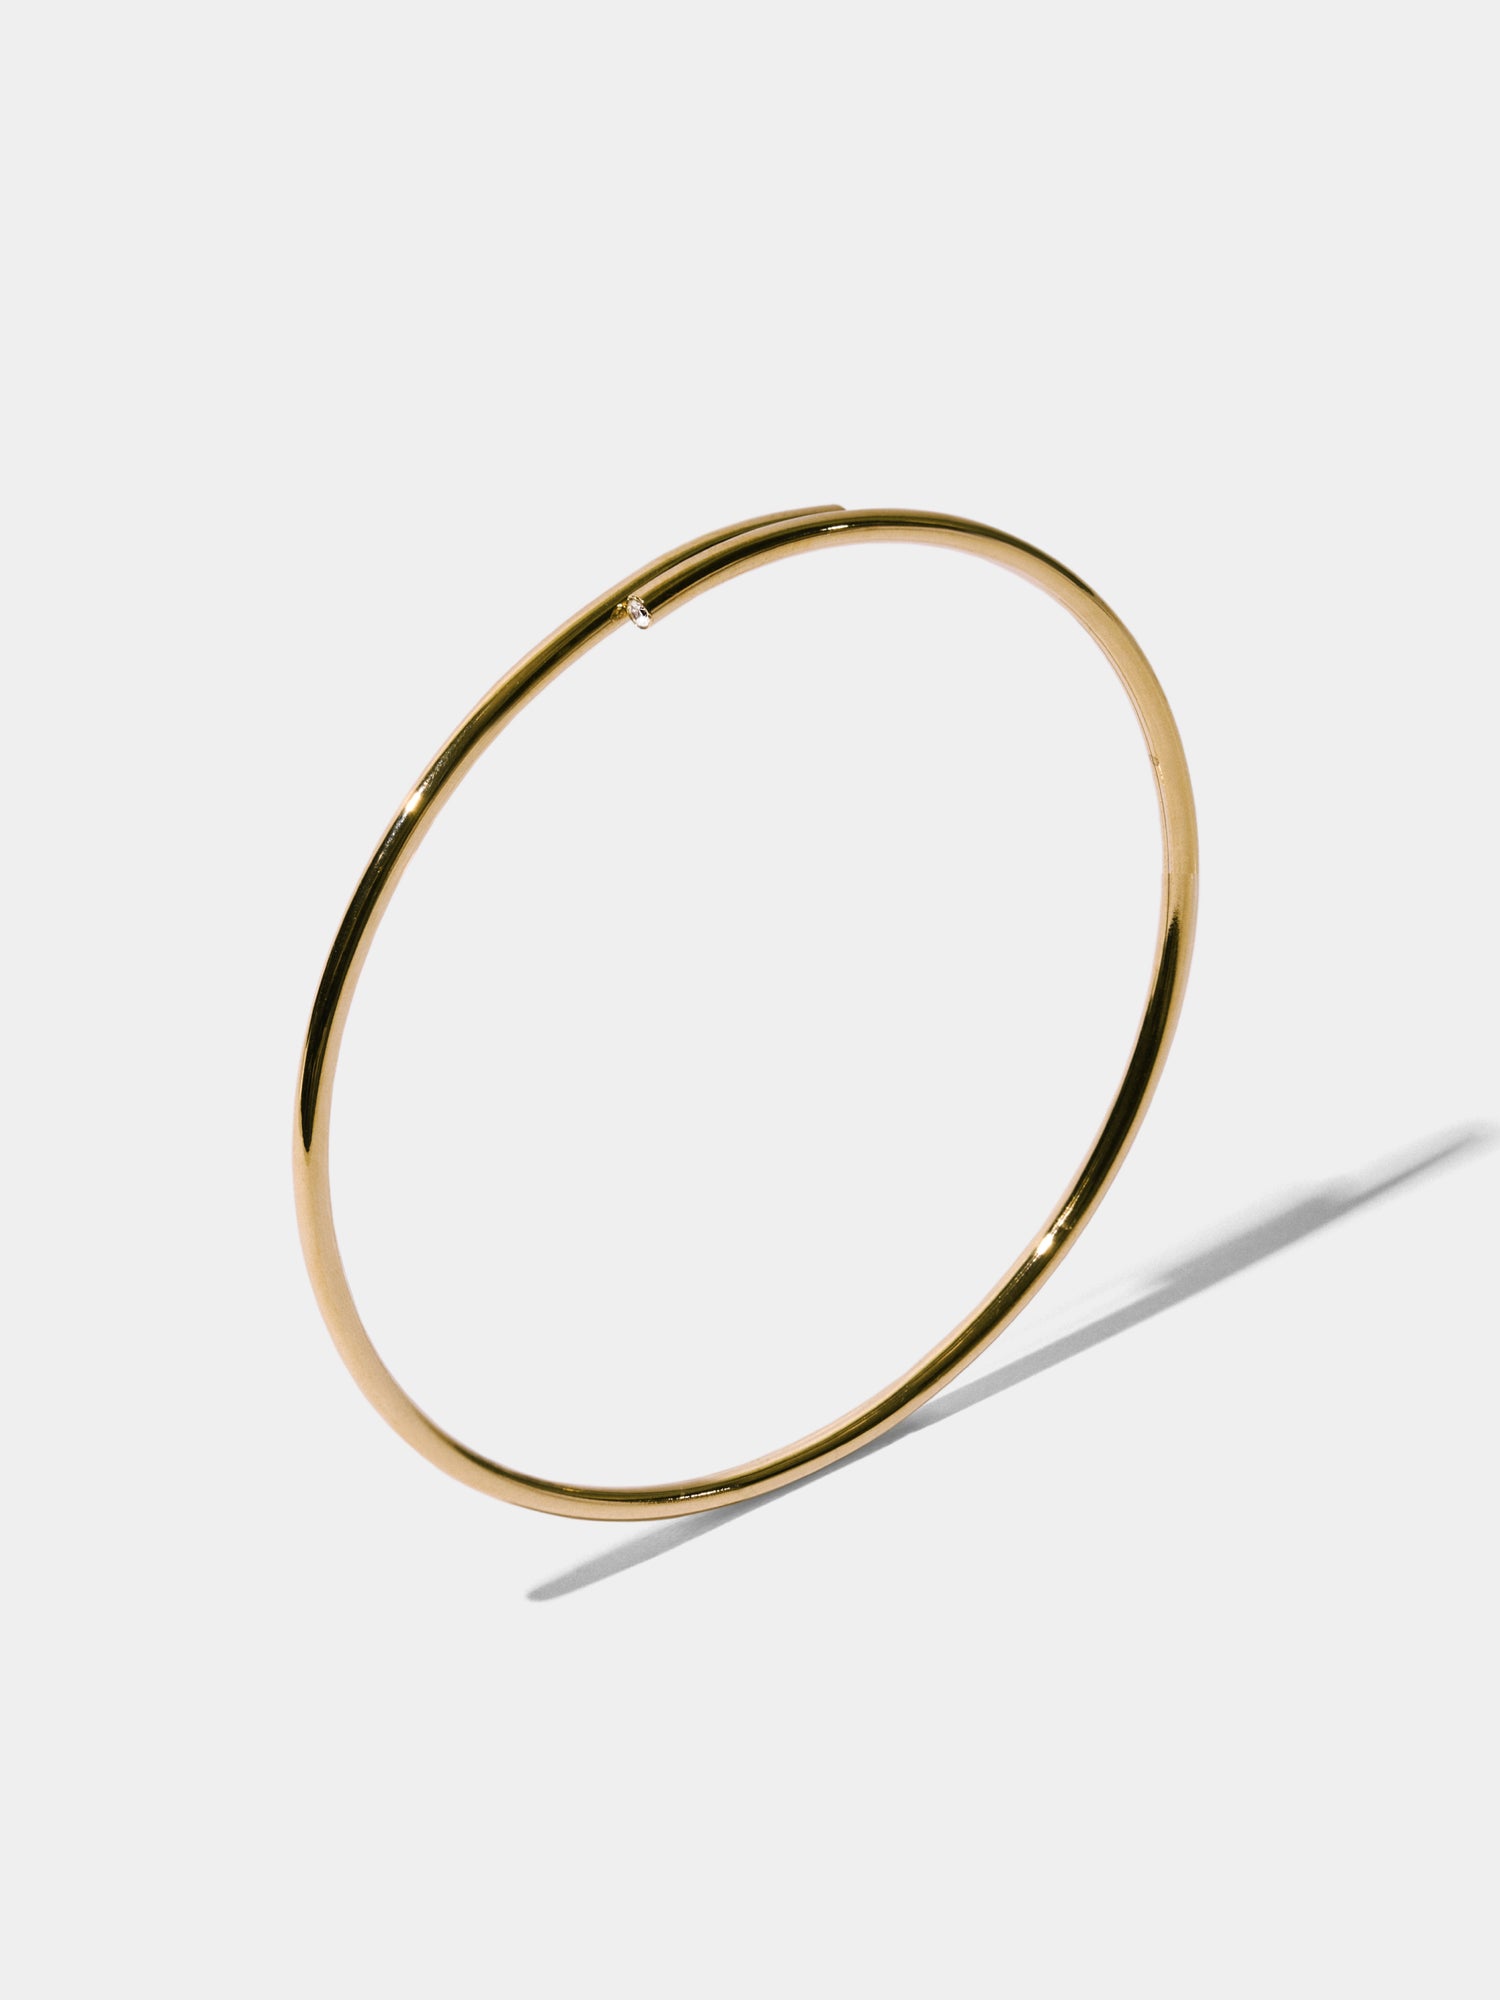 CROSSING_Bangle_Round_1.8MM_S